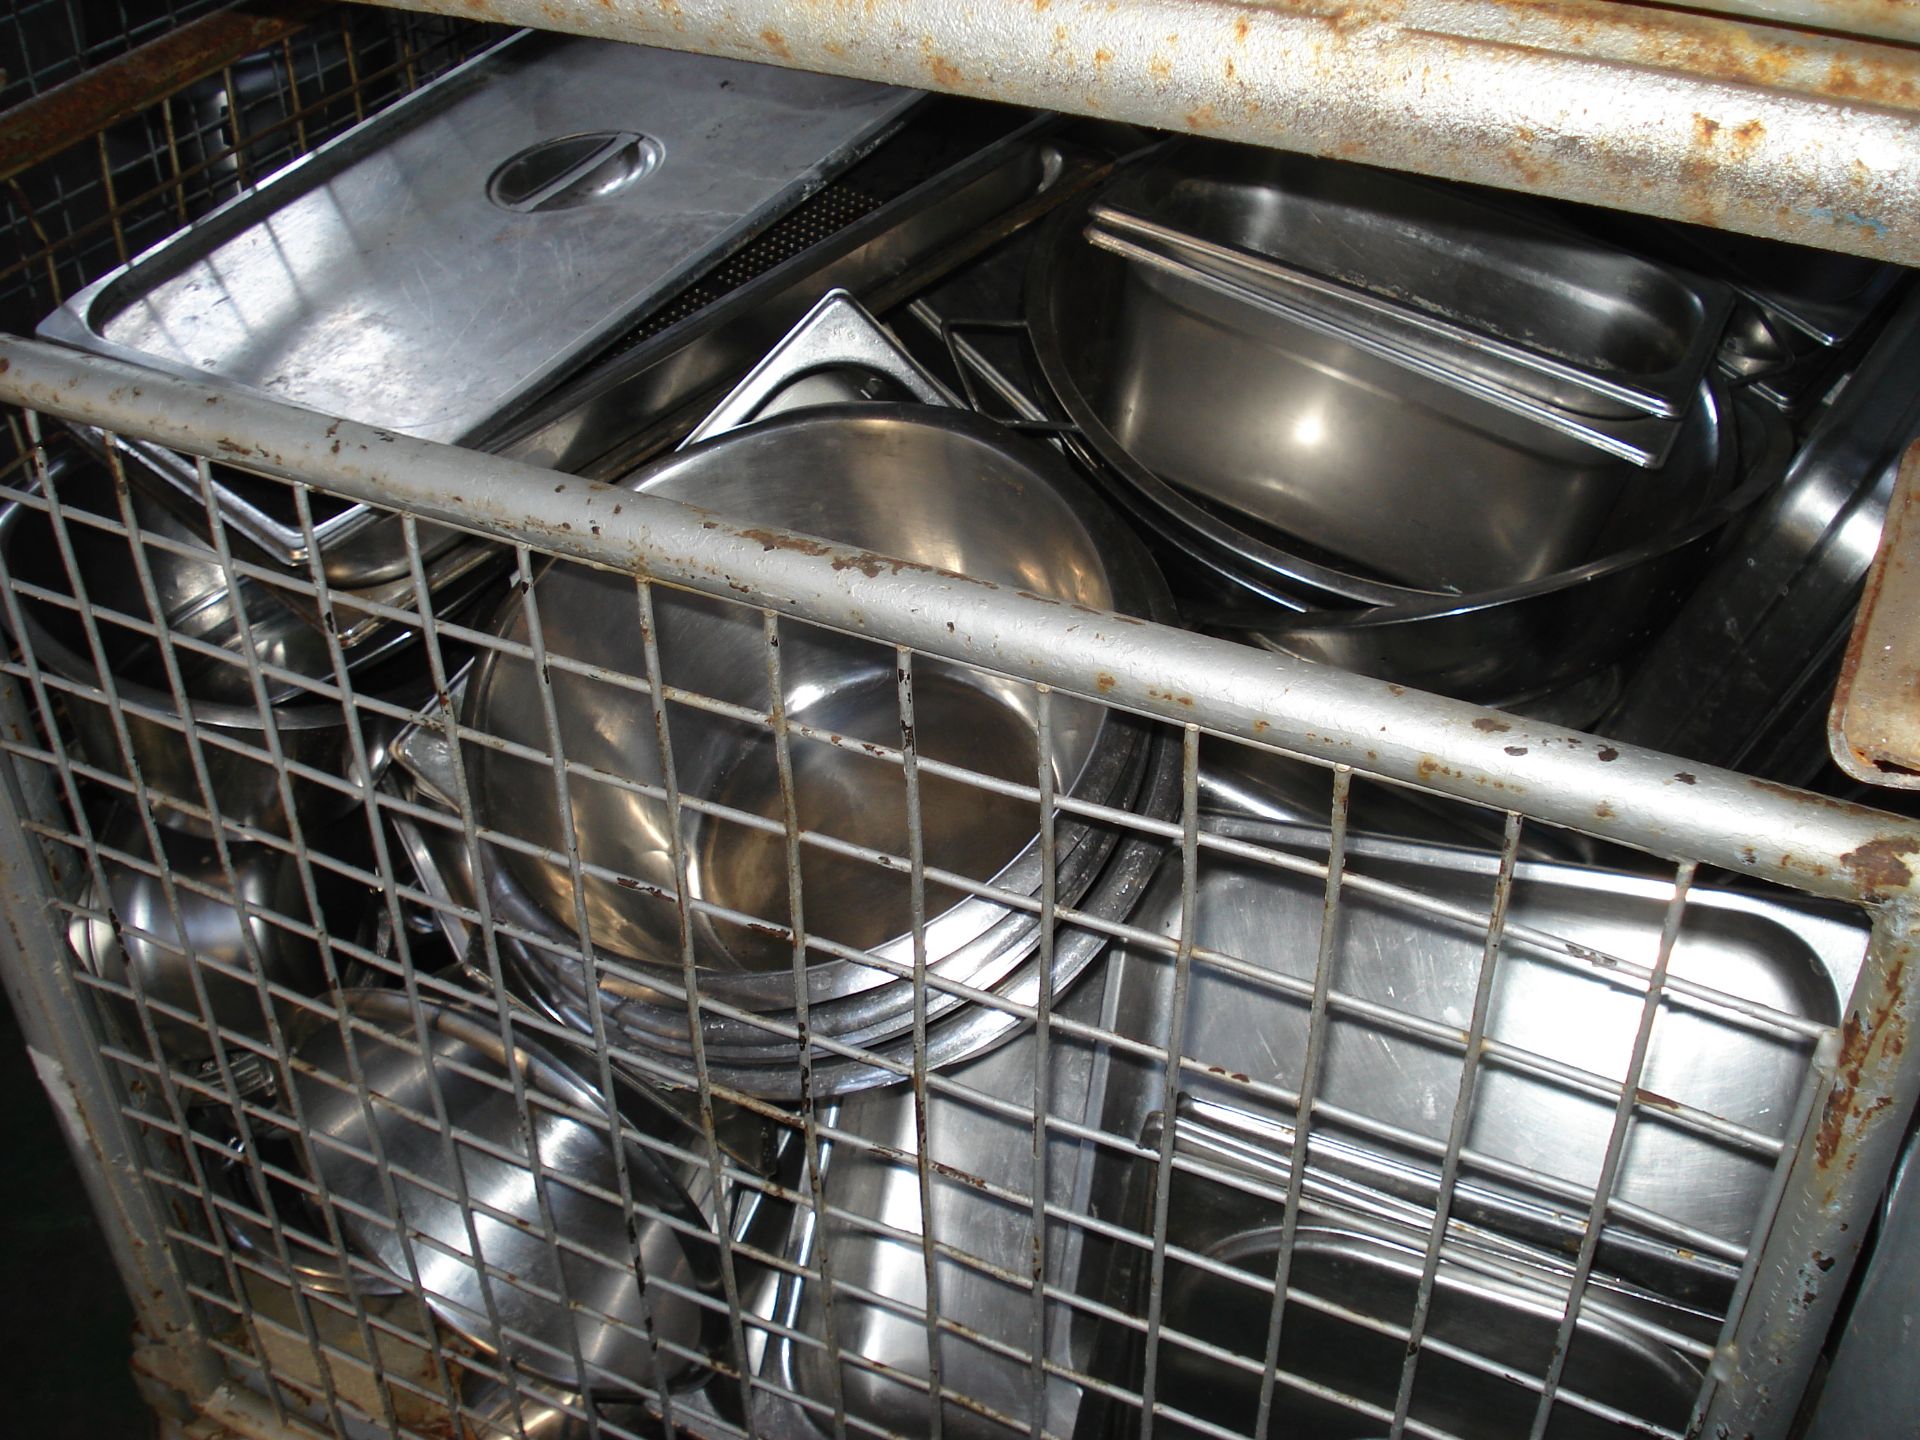 MIXED COMMERCIAL GRADE COOKING TRAYS/SAUCEPANS AND BAIN MARIE POTS - MIXED CONDITION - STORAGE MEDIA - Image 4 of 4